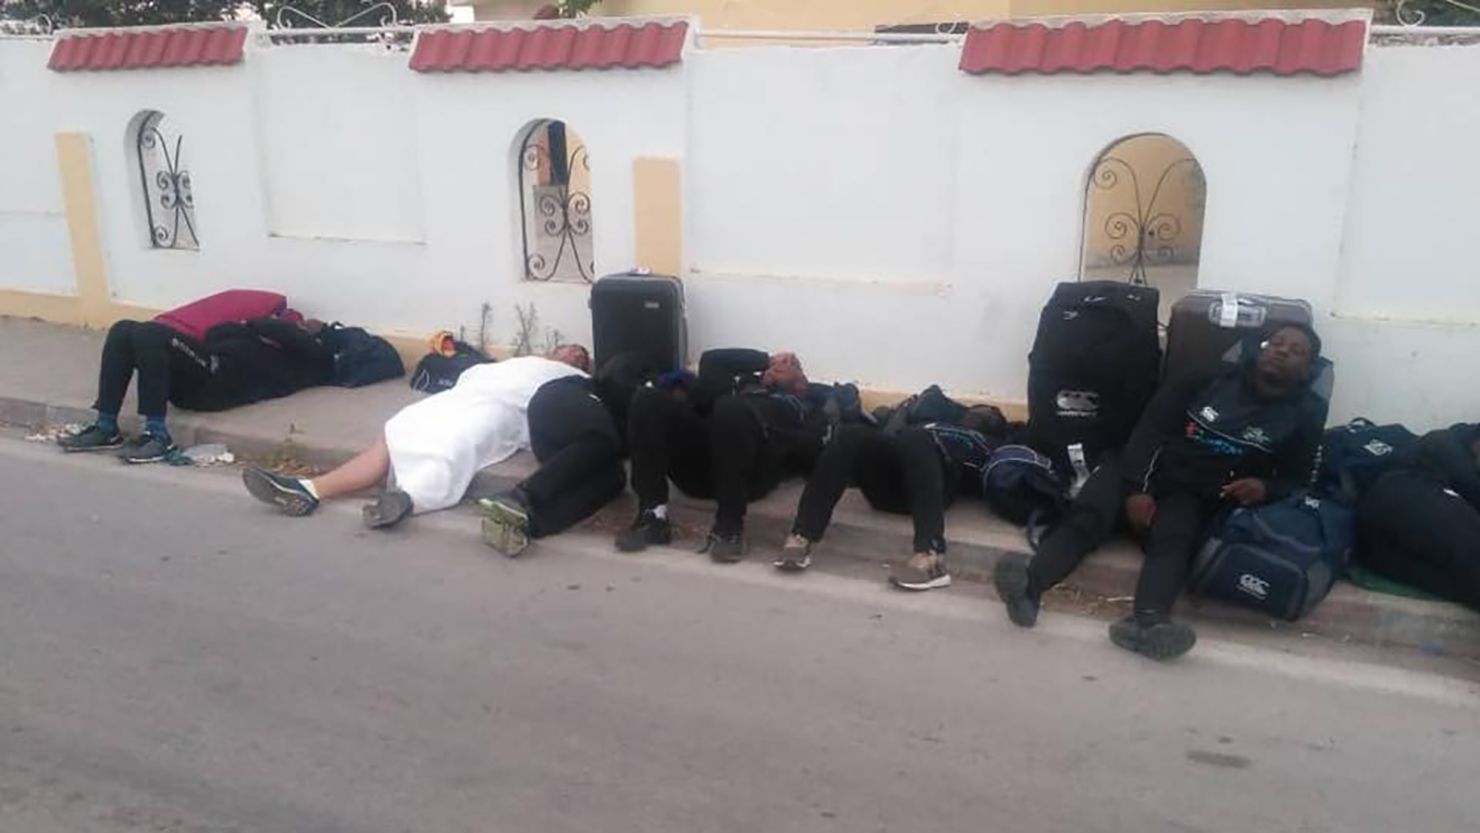 The Zimbabwe rugby team slept on the street in protest at the standard of accommodation provided by its Tunisian opponents ... but that's just the start 